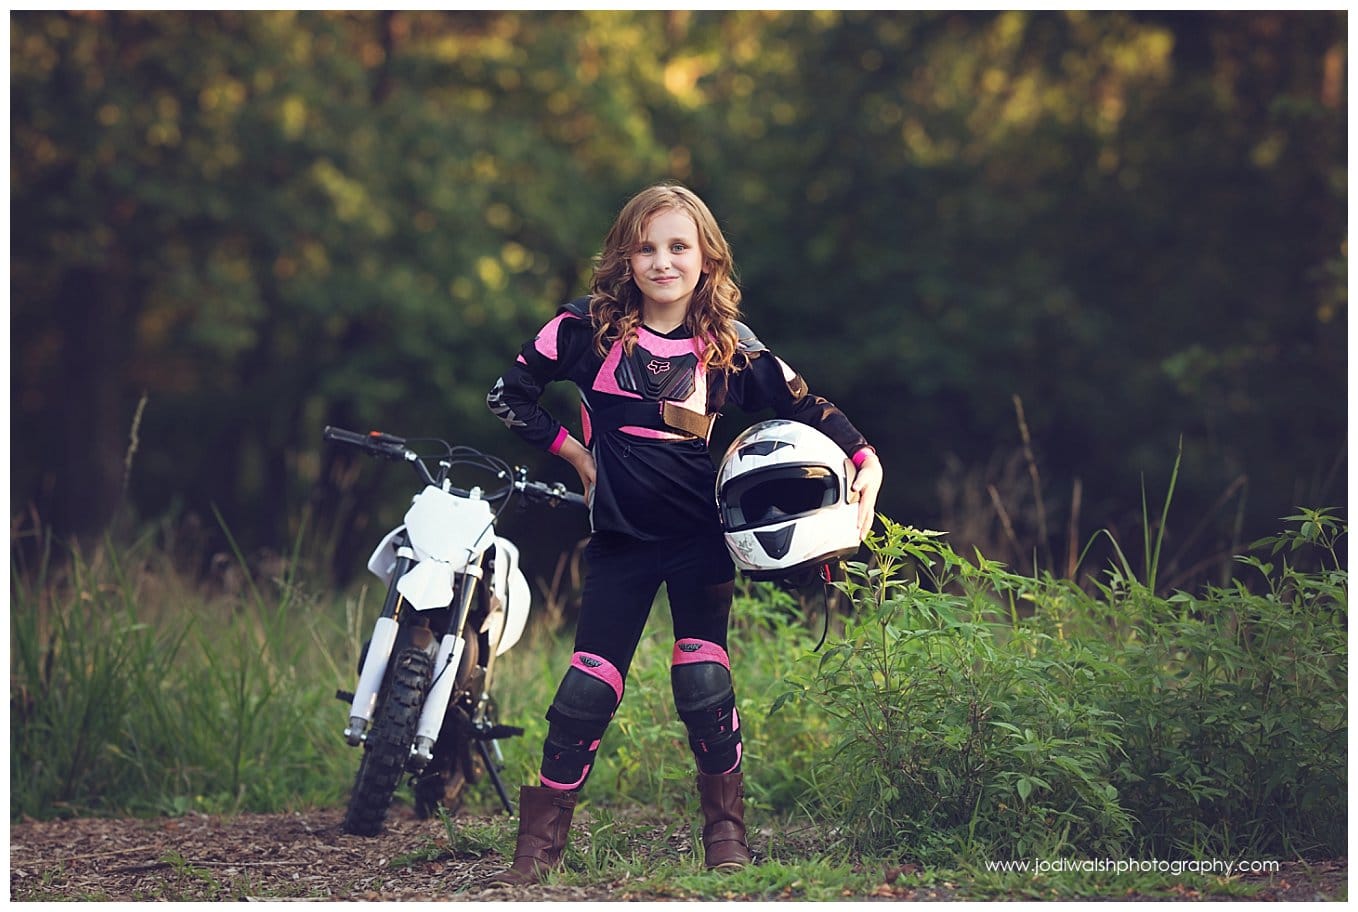 image of a little girl in black and pink racing gear, standing next to her white dirt bike in South Park.